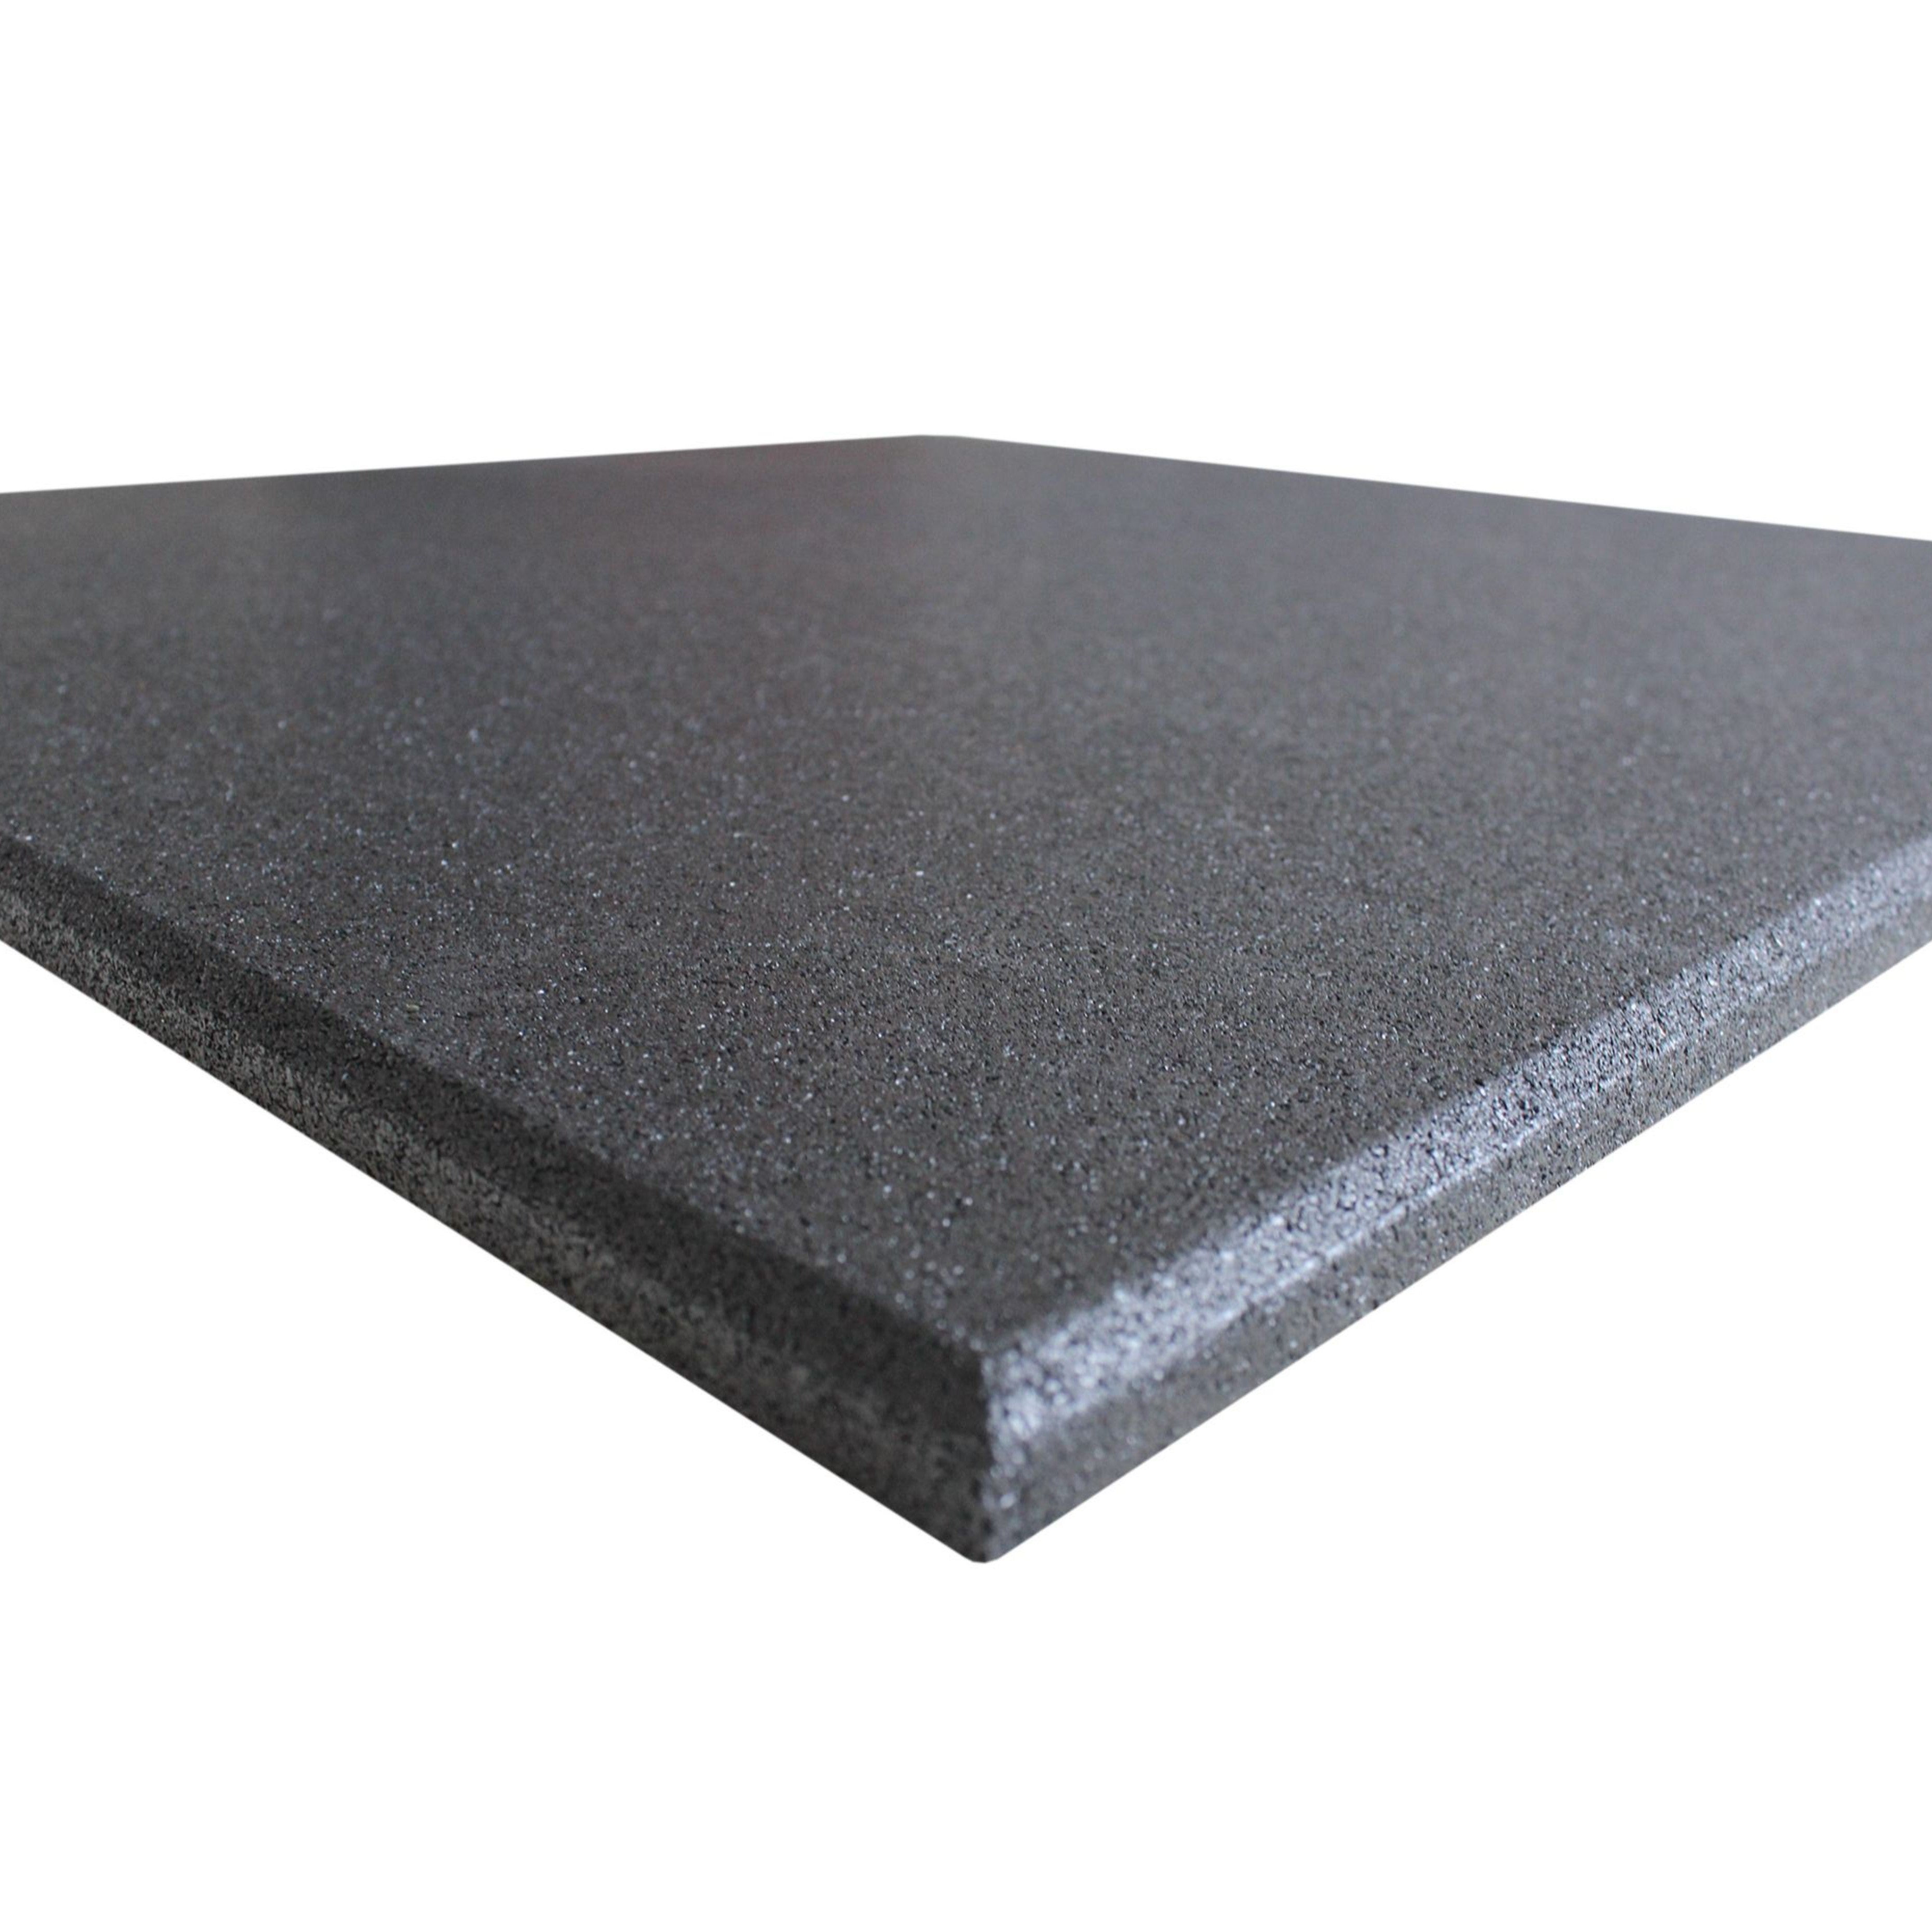 Flatline Pro Grey Rubber Gym Flooring 1m x 1m x 20mm from Cannons UK - Cannons UK